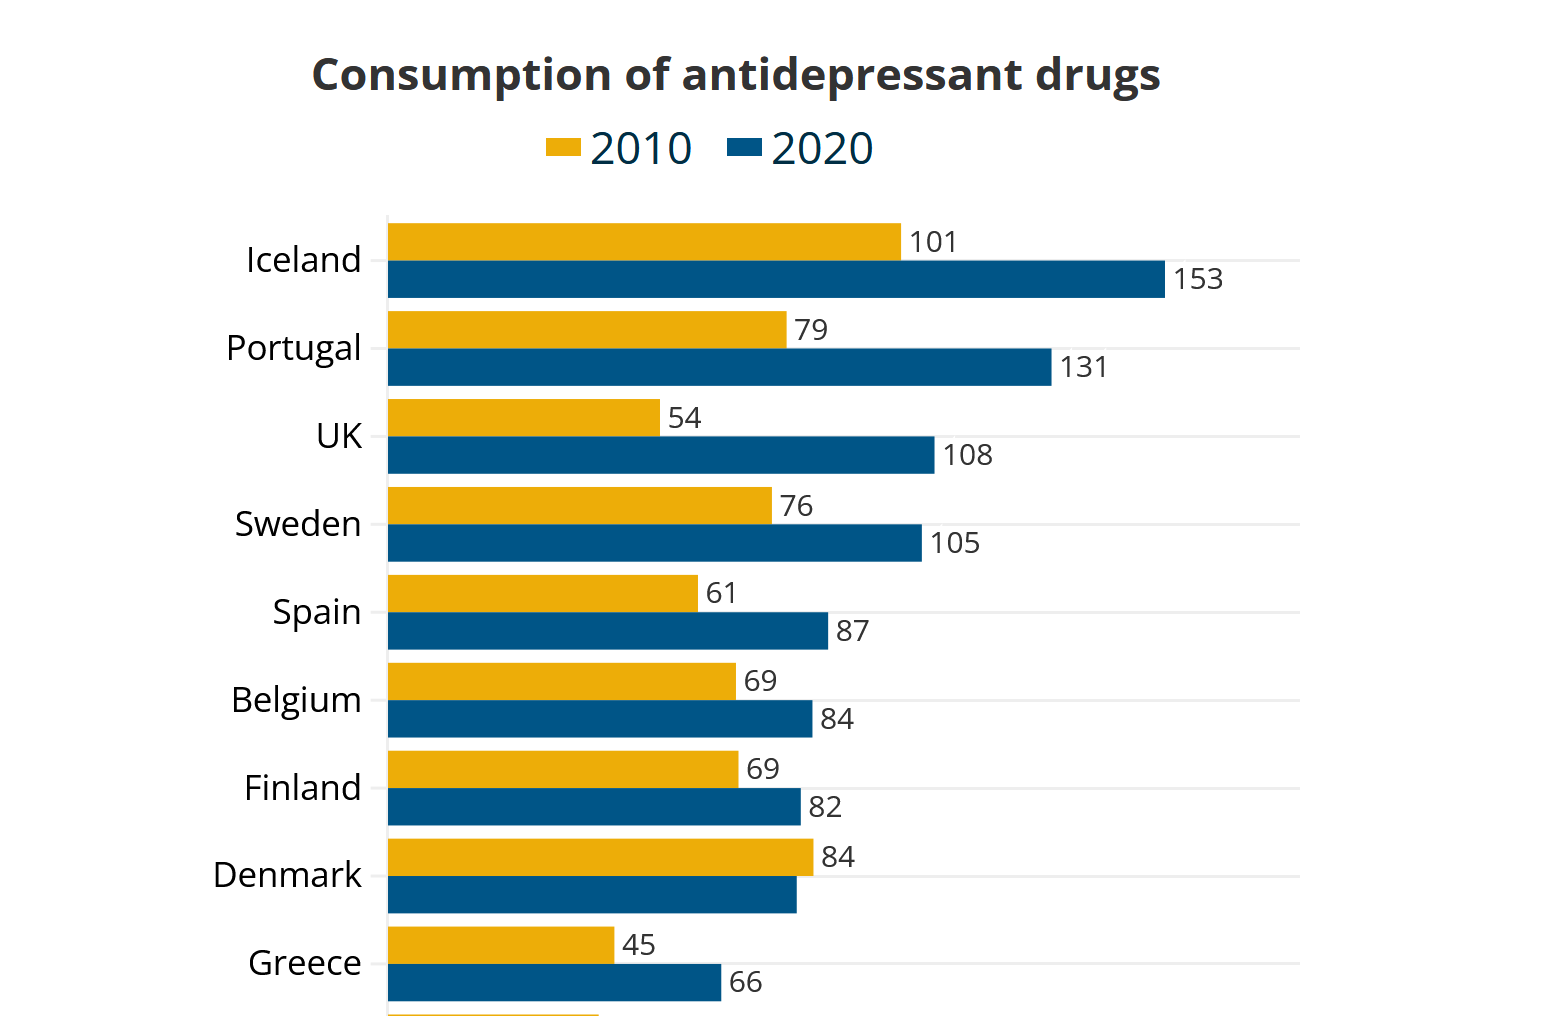 “Happiest countries” in Europe lead consumption of antidepressants